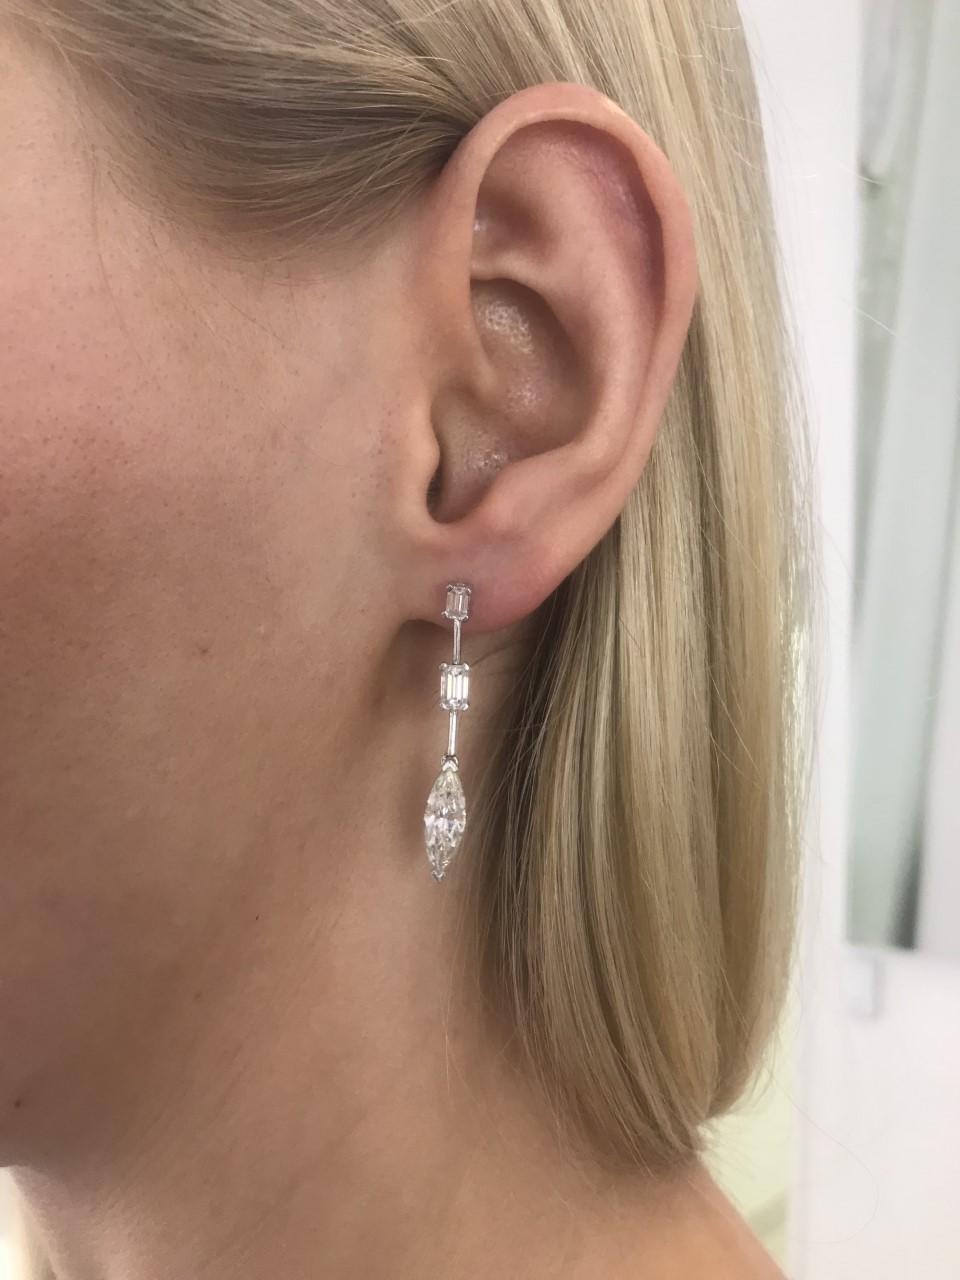 These stunning 2.31 Carat Marquise (2 stones) White Color H Clarity SI2 Diamond Earrings featuring 0.97 Carat Emerald Cut (4 stones) White Color H Clarity SI2 set in 18 Karat White Gold. A total Carat weight of 3.28 Carat these gorgeous dazzling